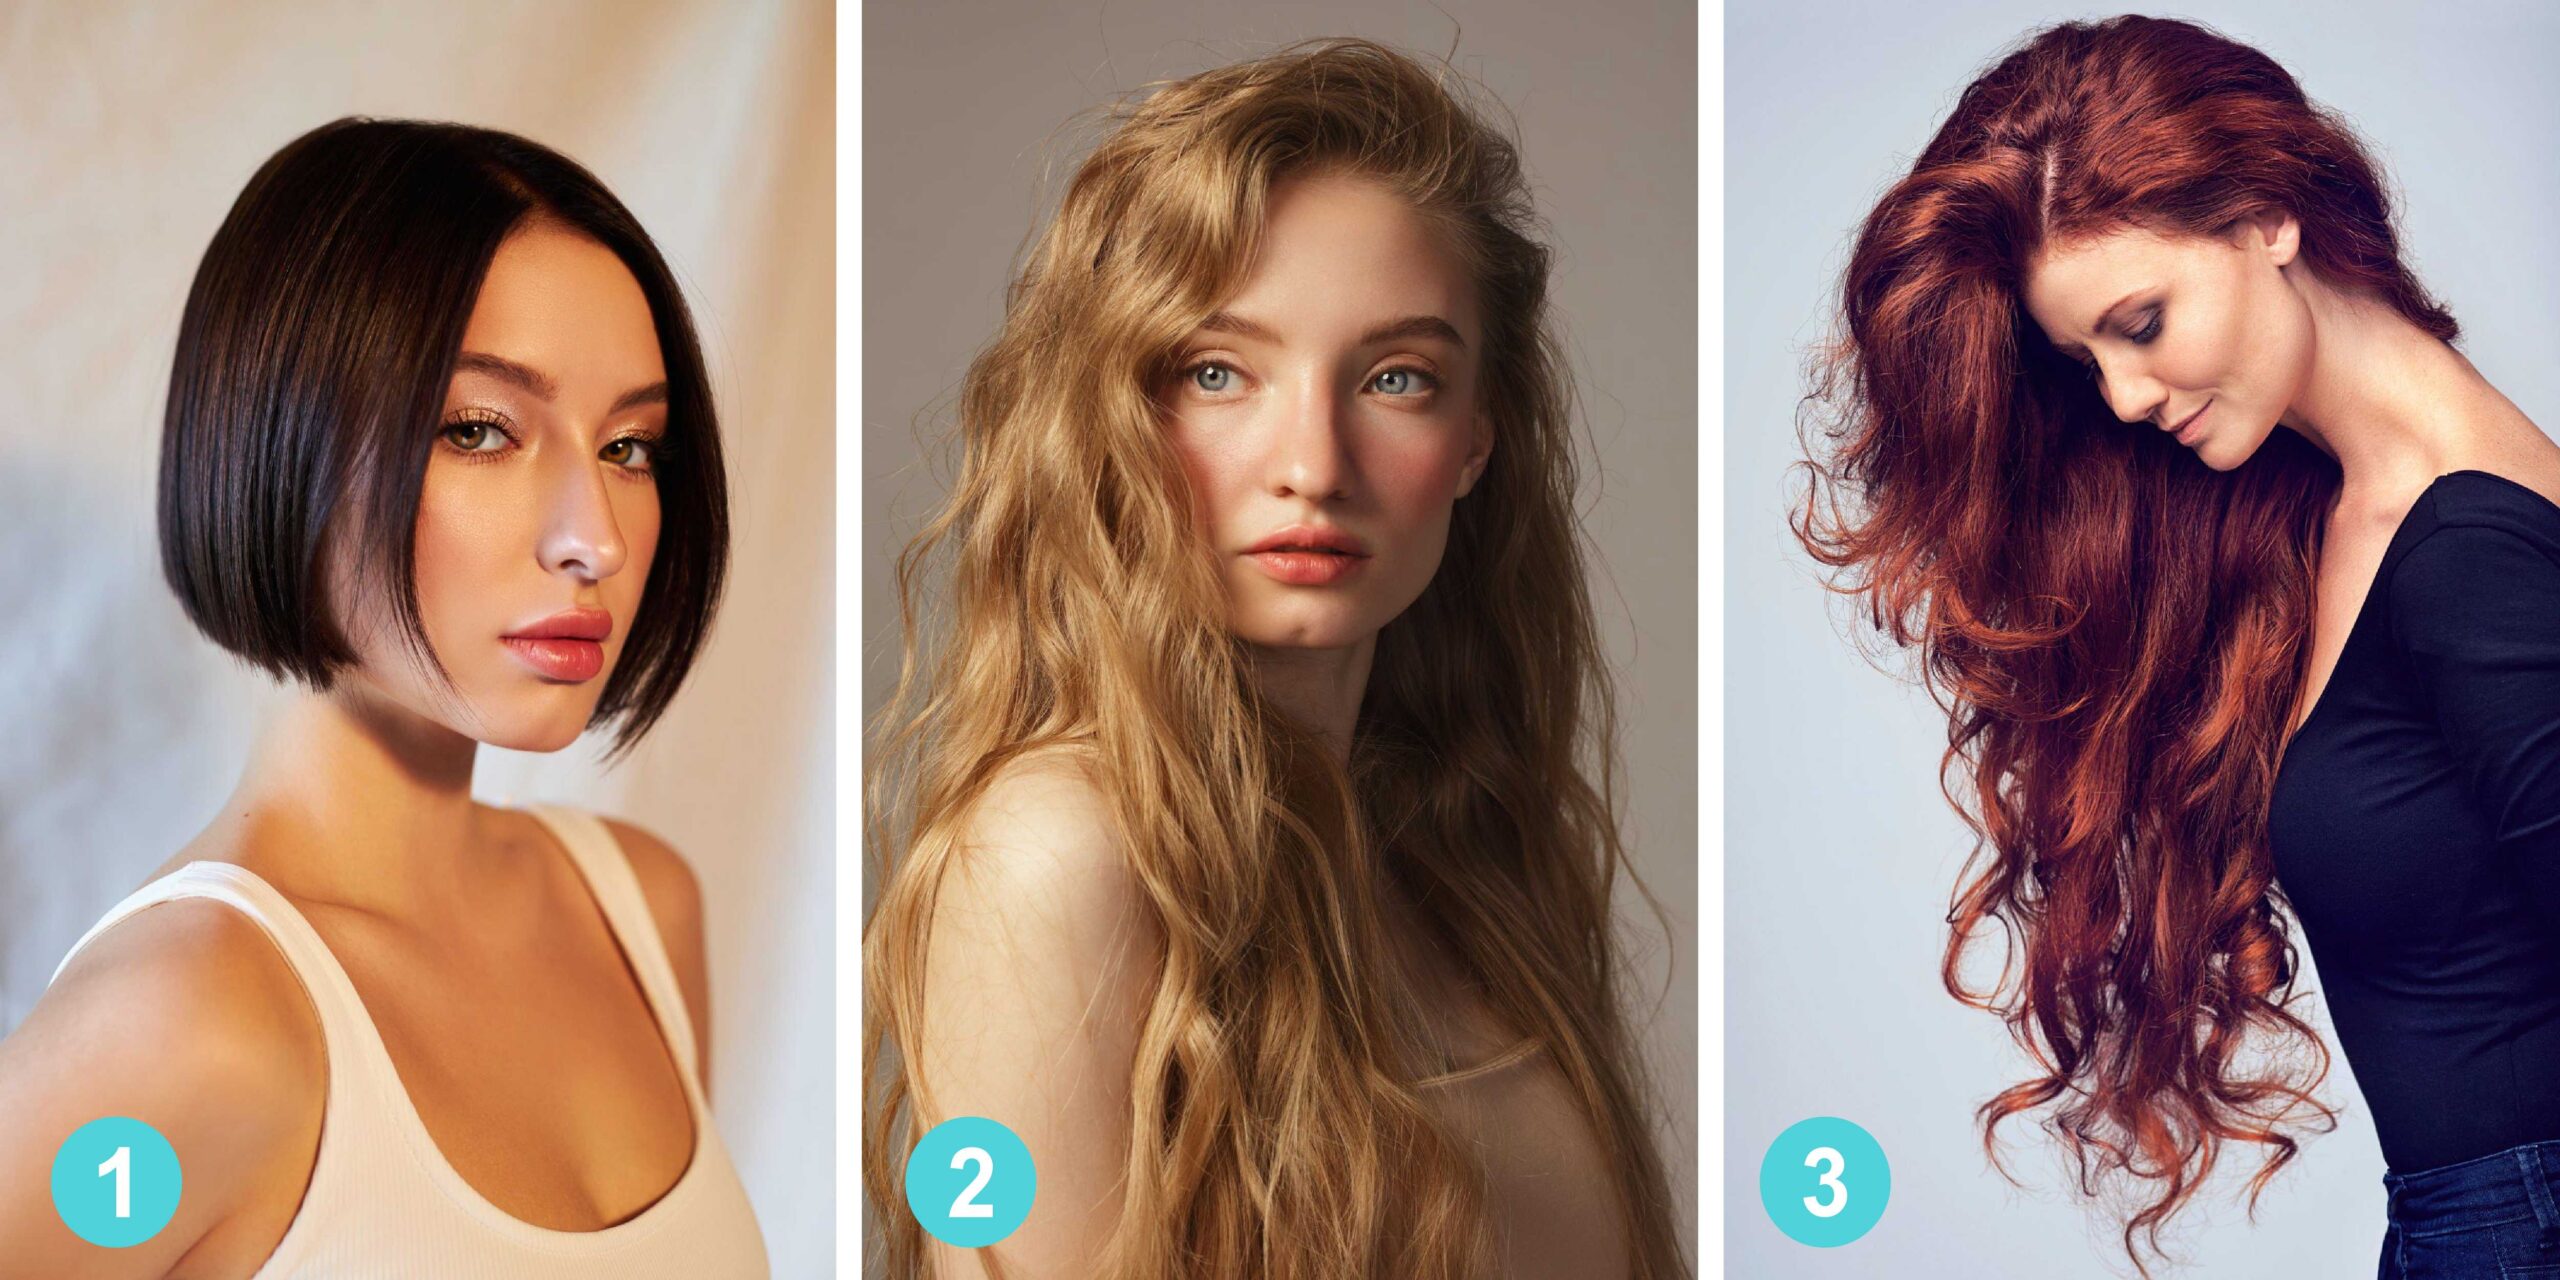 Personality test: What does the length of your hair reveal about your personality?